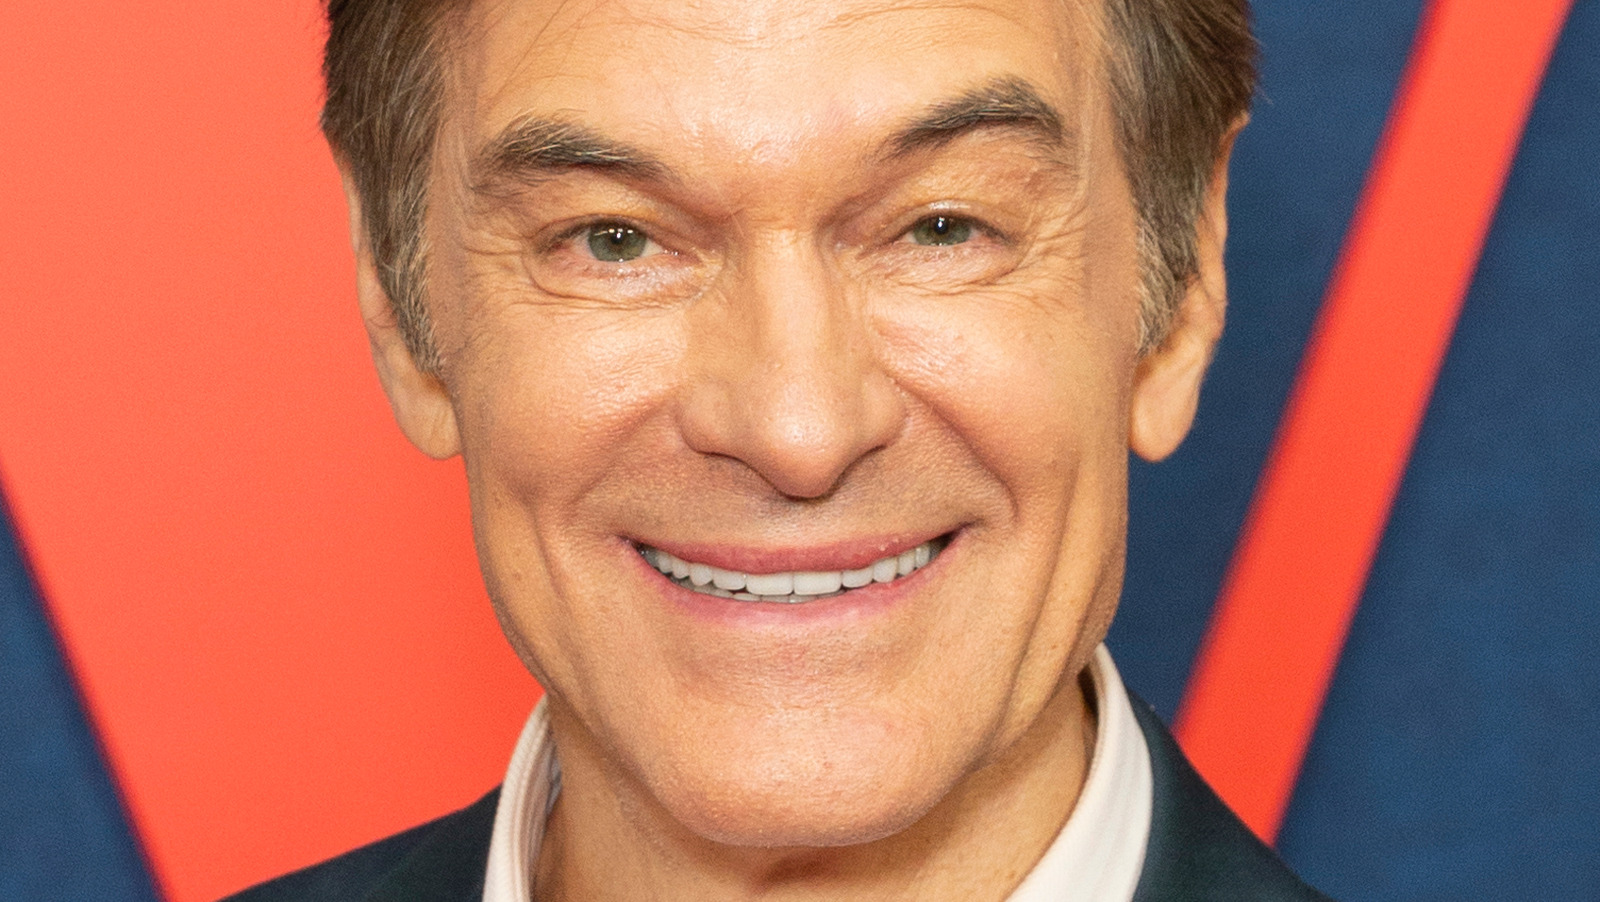 Dr. Oz Debuts Blue Hair on 'The Dr. Oz Show' - wide 4